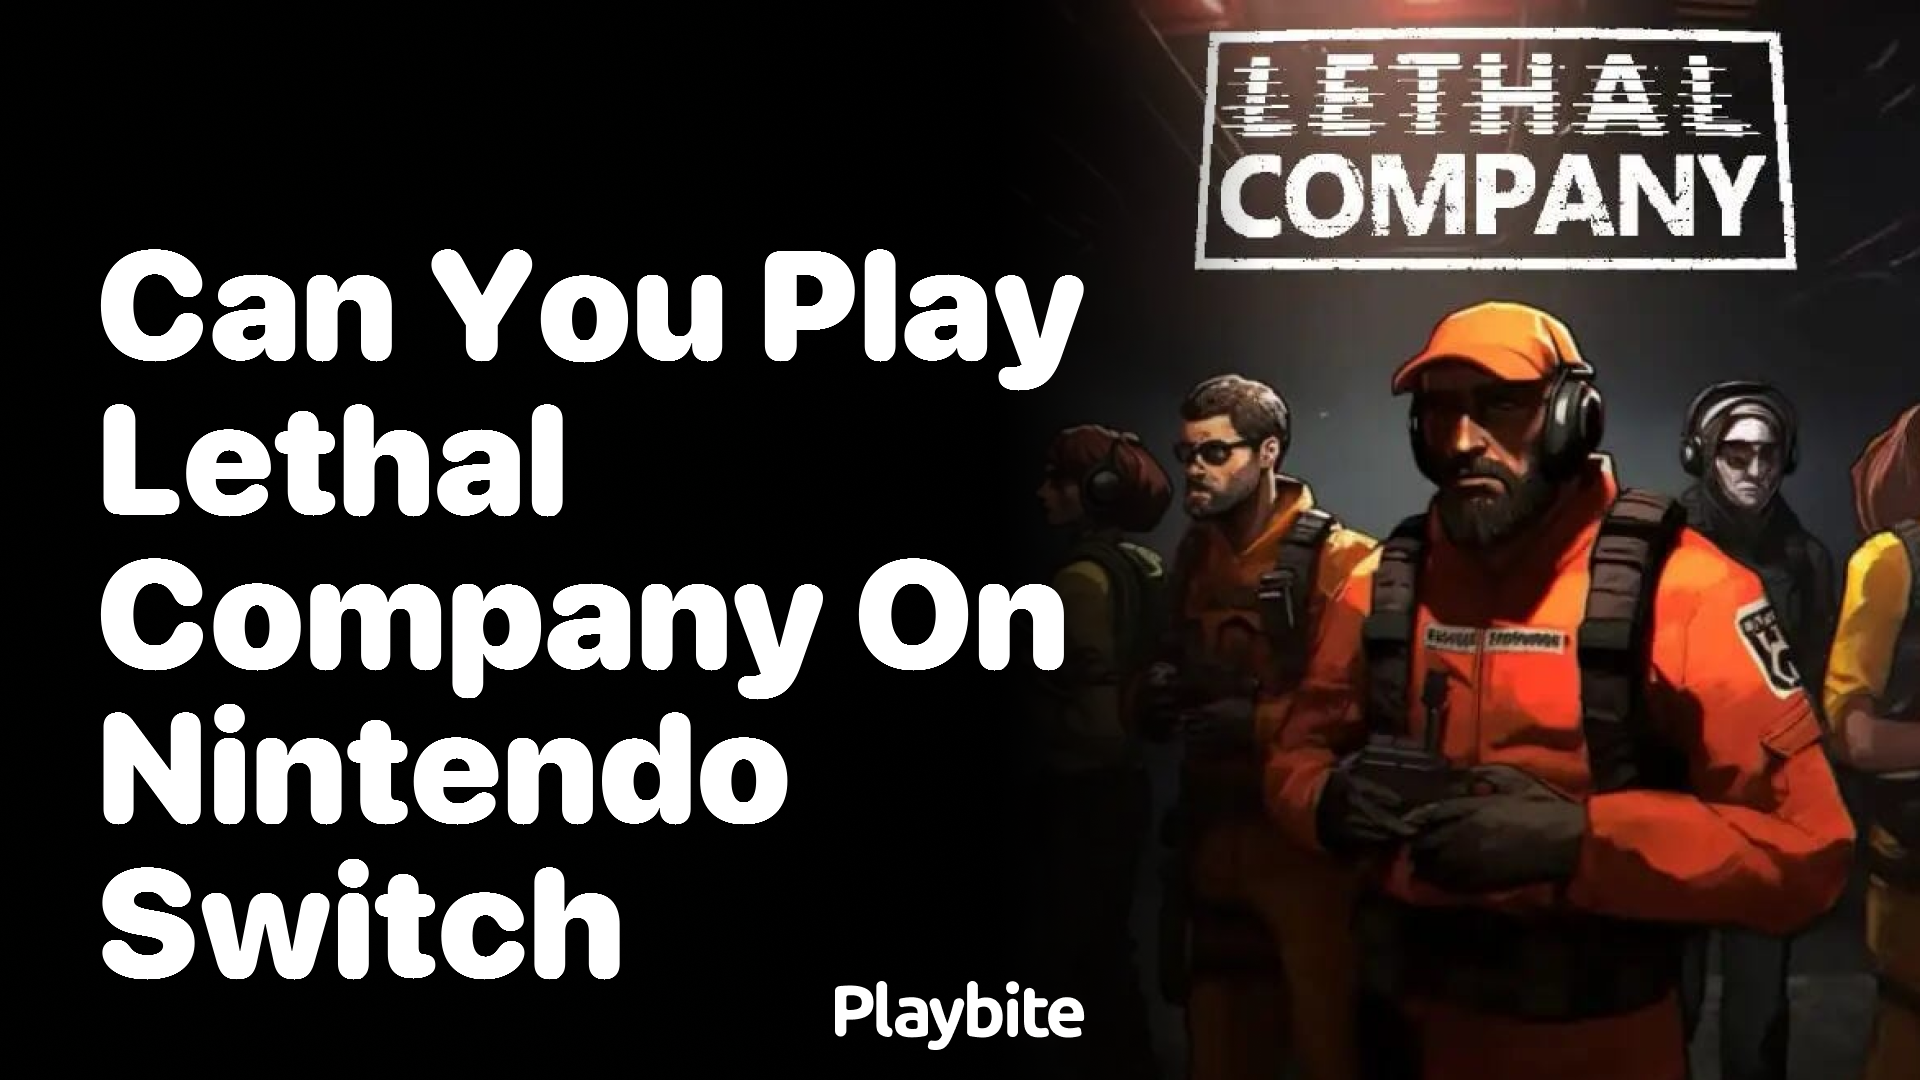 Can You Play Lethal Company on Nintendo Switch?